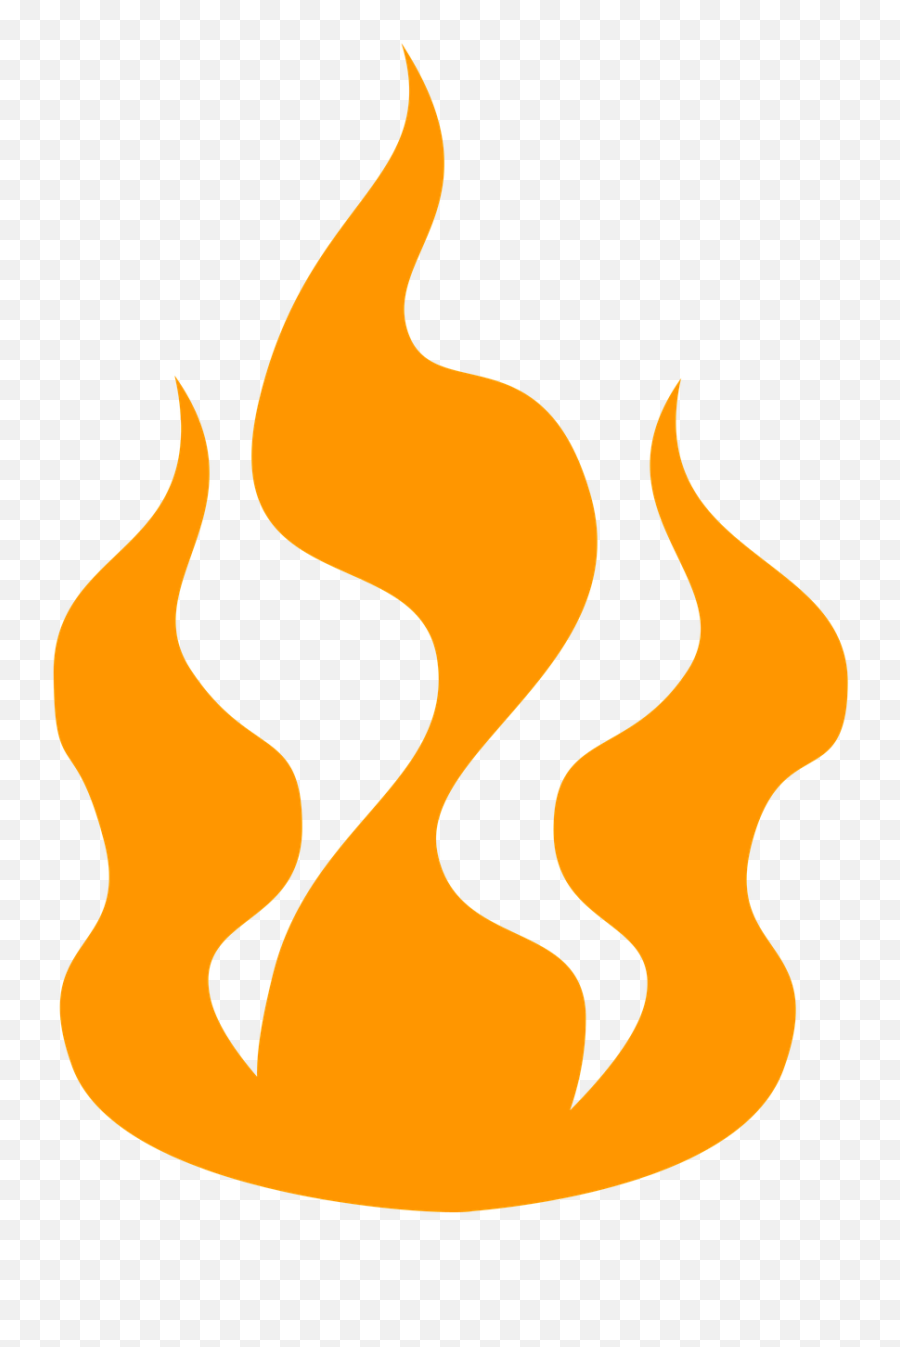 Download Free Photo Of Firehoticonsilhouetteburn - From 3000 X 3000 Px Fire Png,Hell Icon